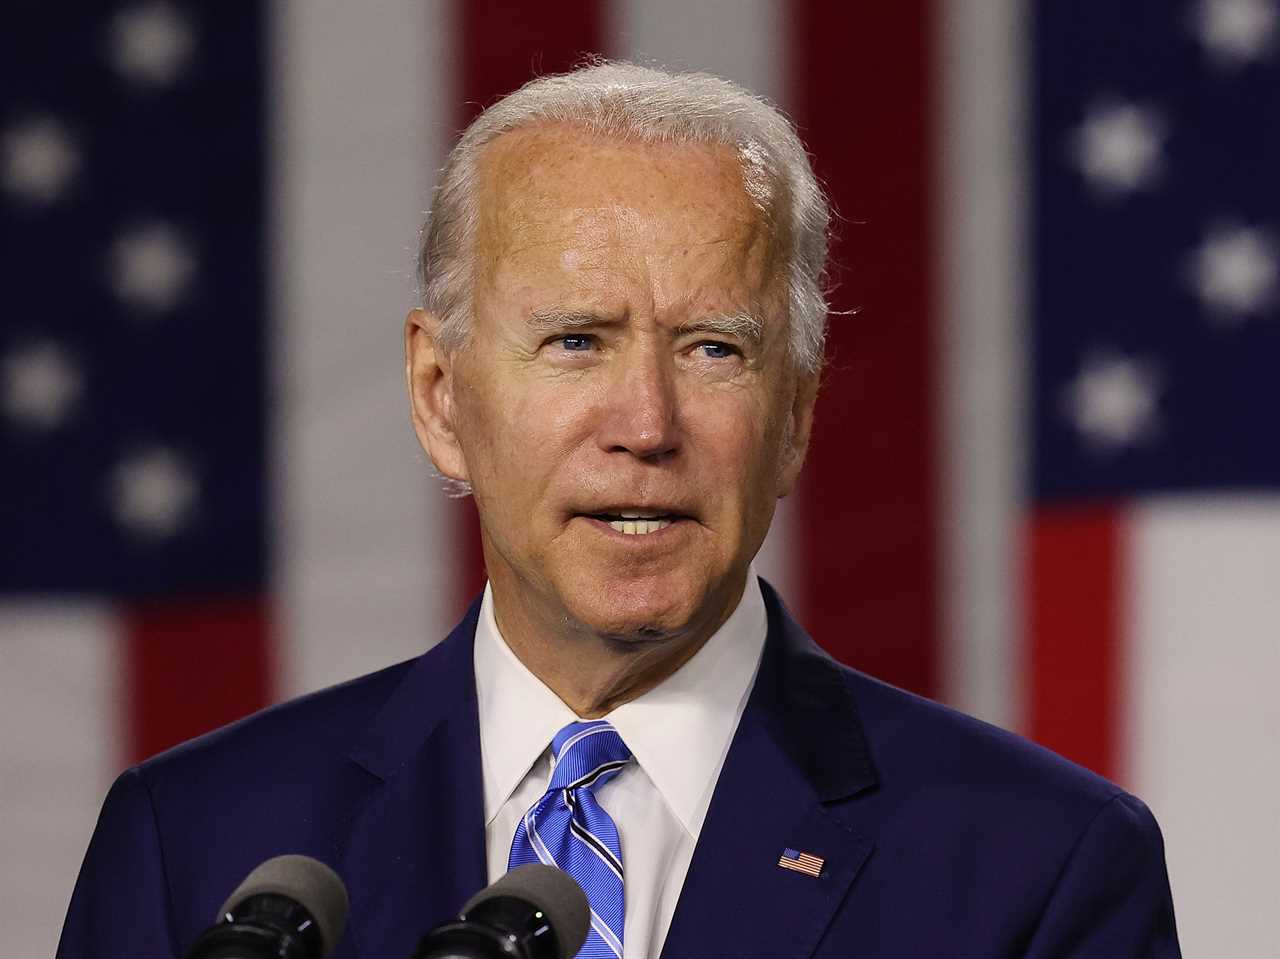 Biden demands Trump sign ‘critical’ relief bill with $600 checks ‘NOW’ – as president digs in on $2,000 payments